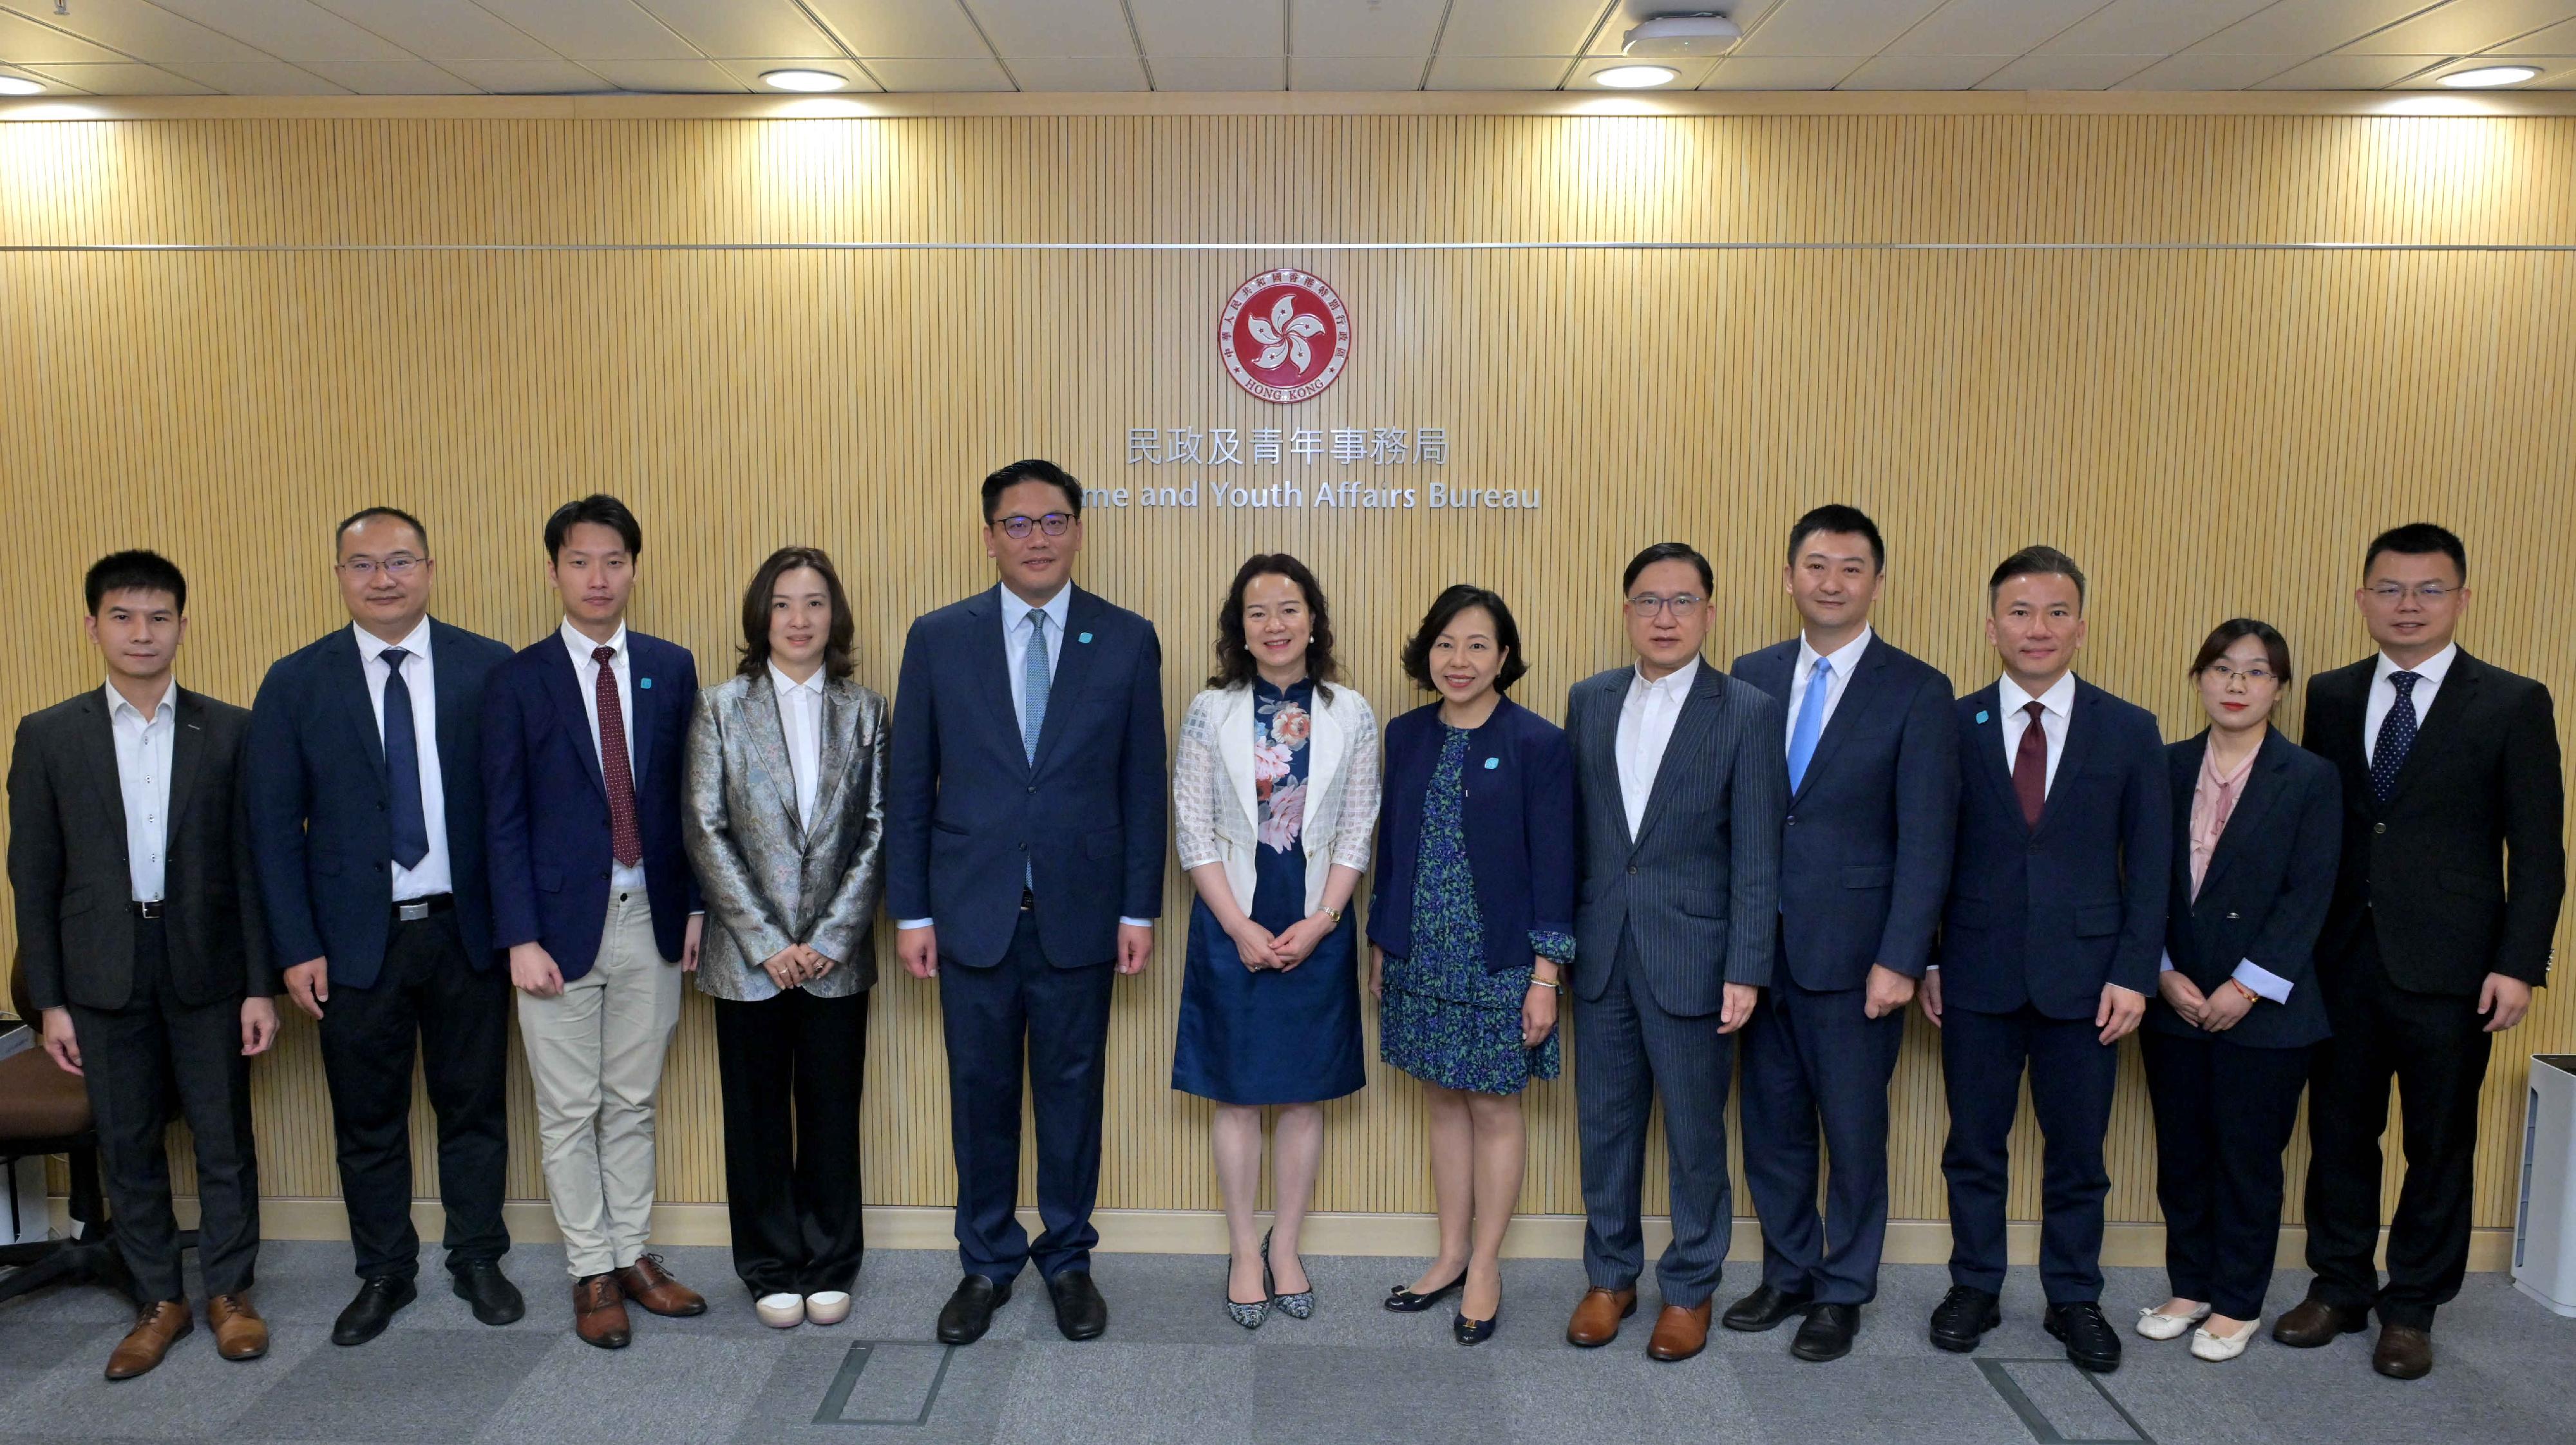 The Secretary for Home and Youth Affairs, Miss Alice Mak (sixth right), today (June 27) meets with the Director-General of the Hong Kong and Macao Affairs Office of the Hubei Provincial People's Government, Ms Zhang Xiaomei (sixth left), to exchange views on enhancing youth development and exchanges between Hubei and Hong Kong. The Under Secretary for Home and Youth Affairs, Mr Clarence Leung (fifth left), and the Commissioner for Youth, Mr Wallace Lau (third right), also join the meeting.
